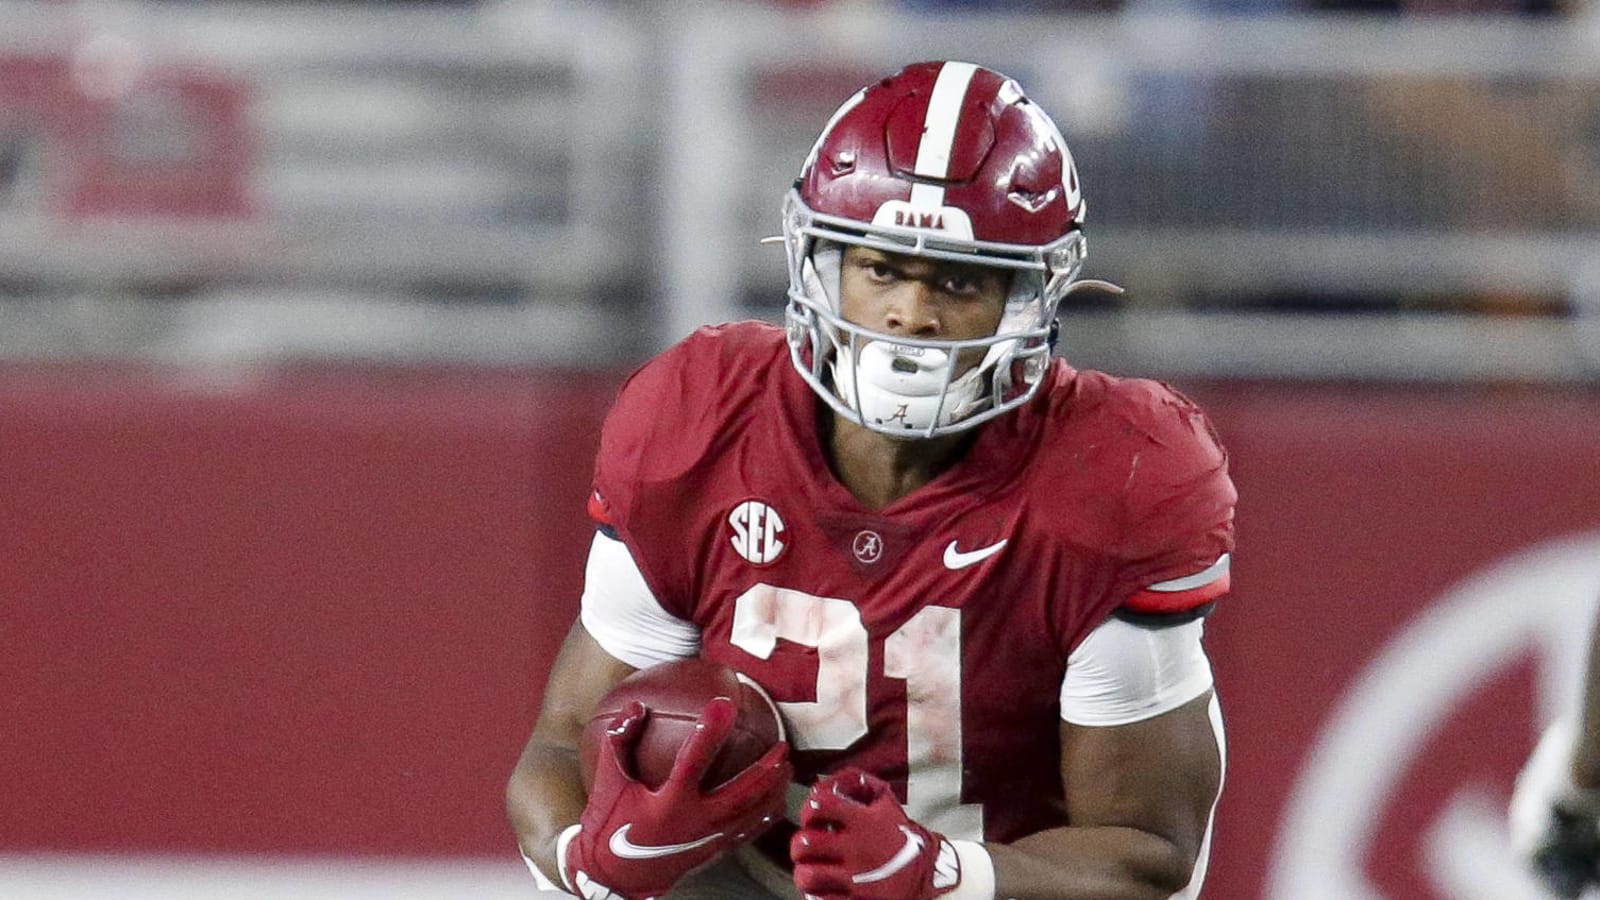 Alabama RB Jase McClellan out for season with knee injury